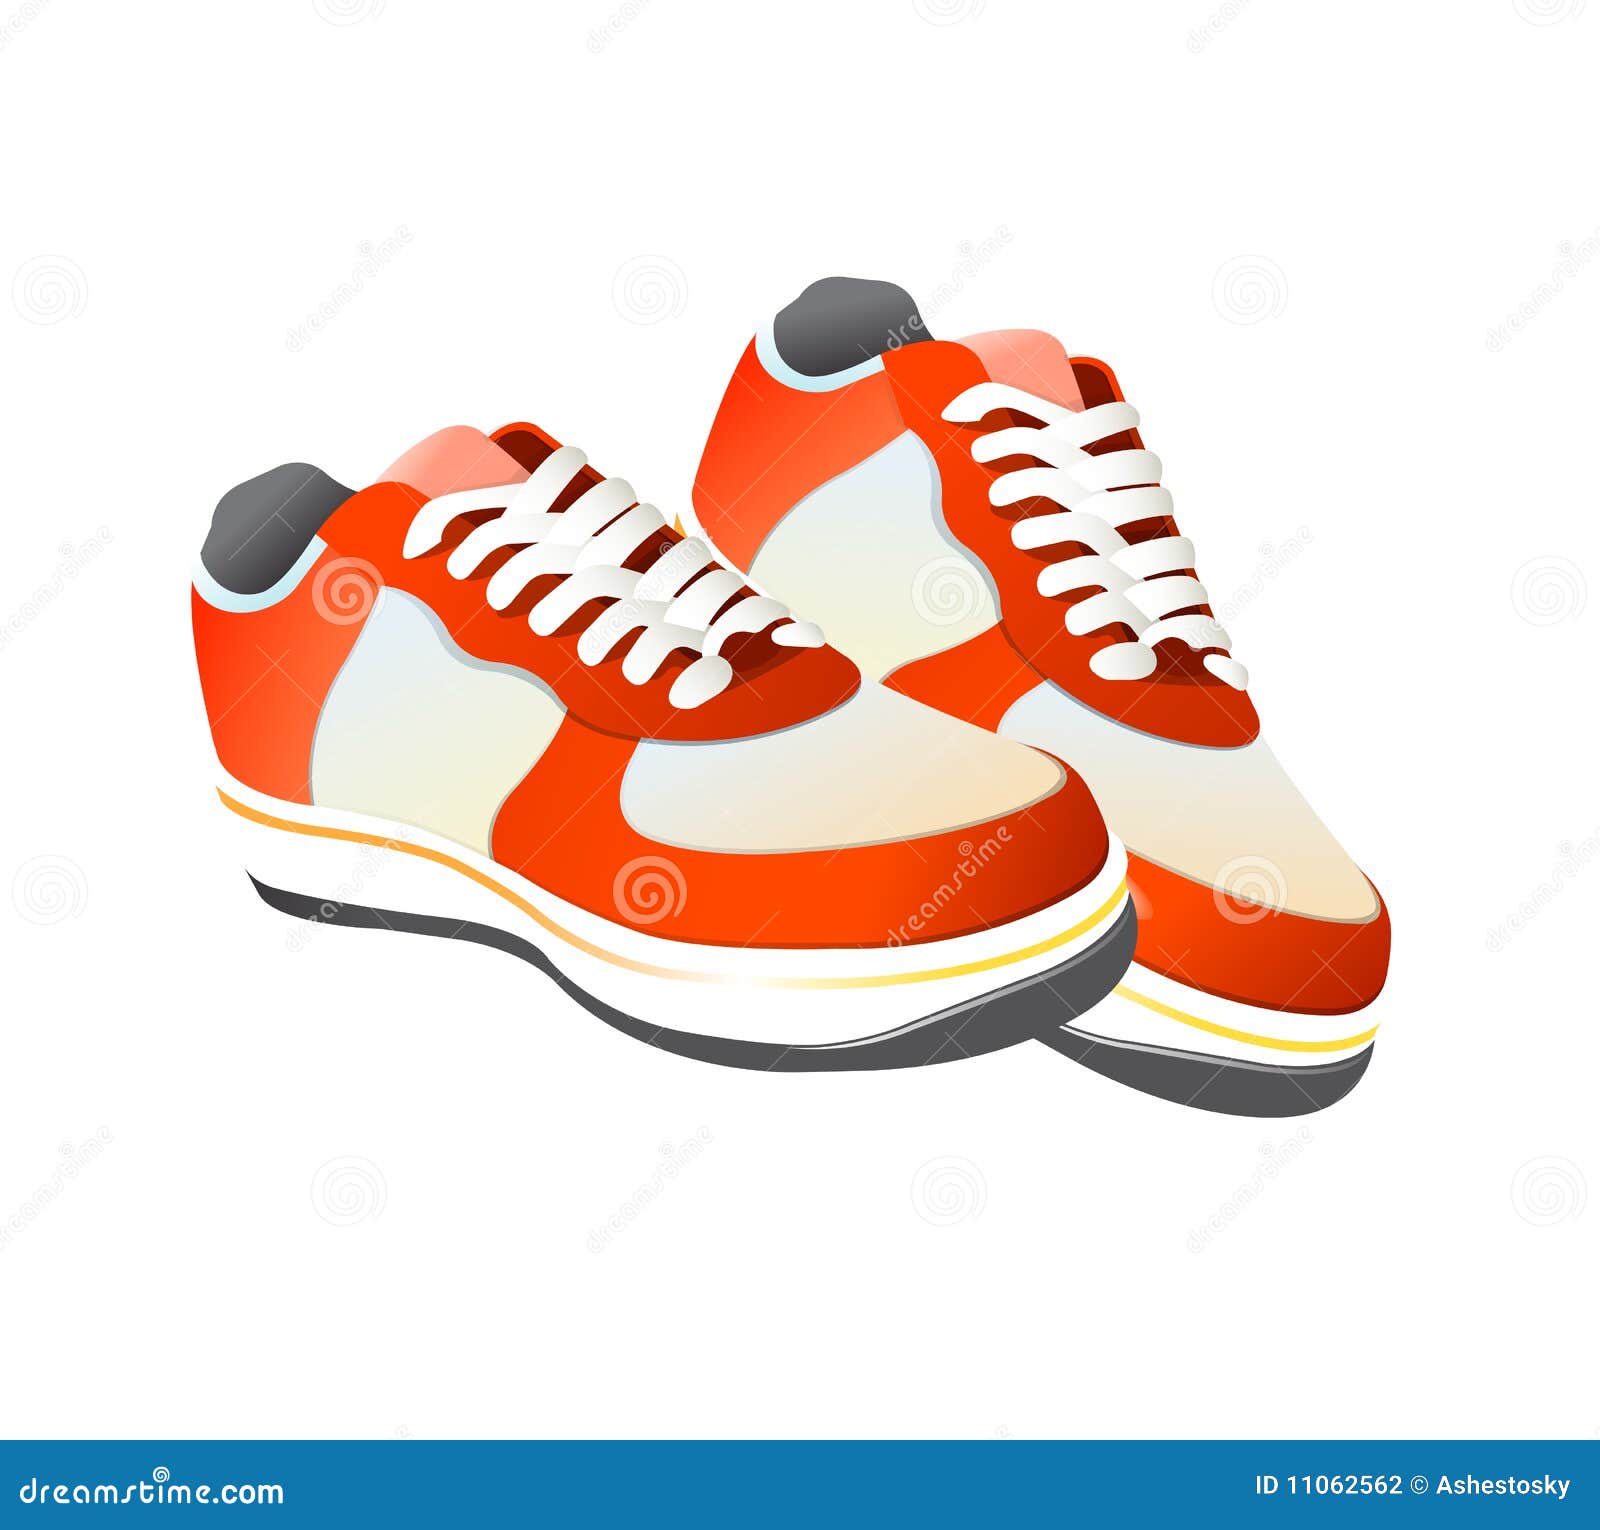 for  shoes shoes related gym and sports tennis illustration vector of gym gym to